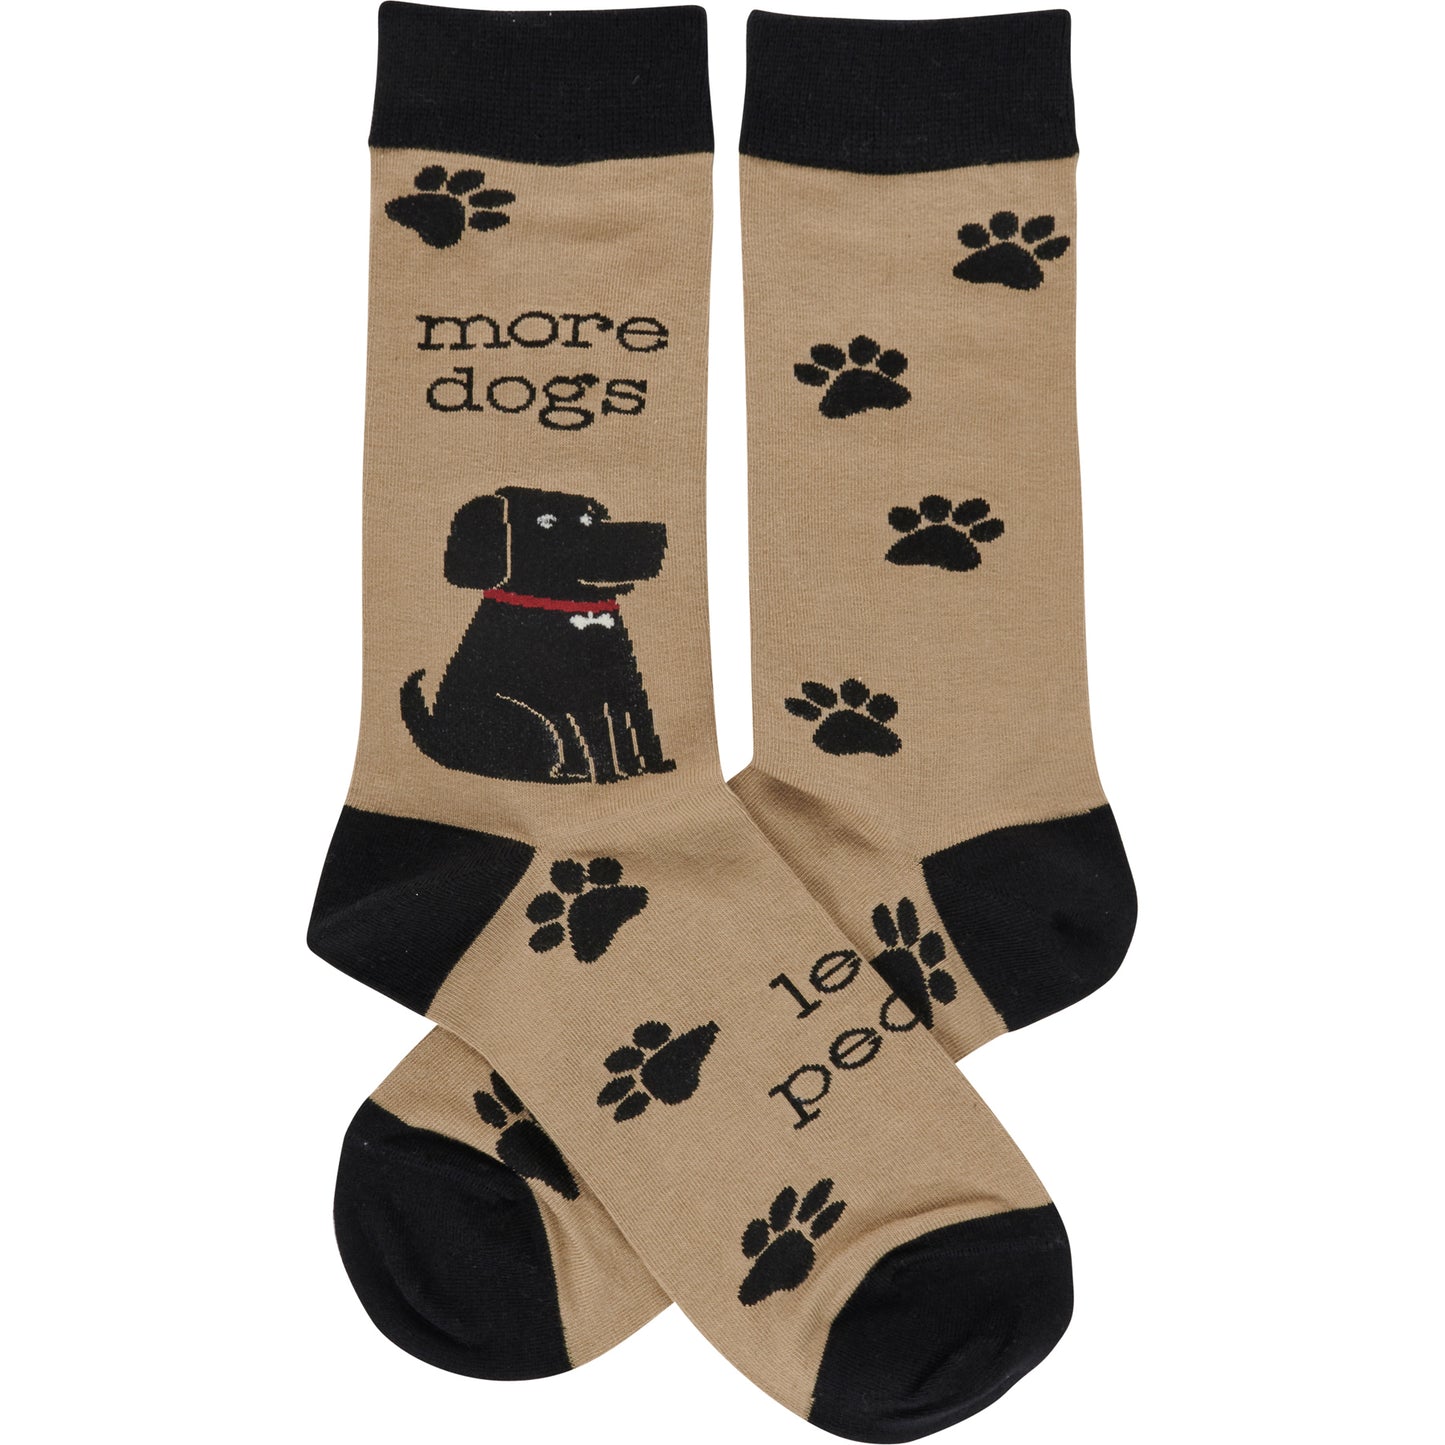 Socks - "More Dogs Less People"